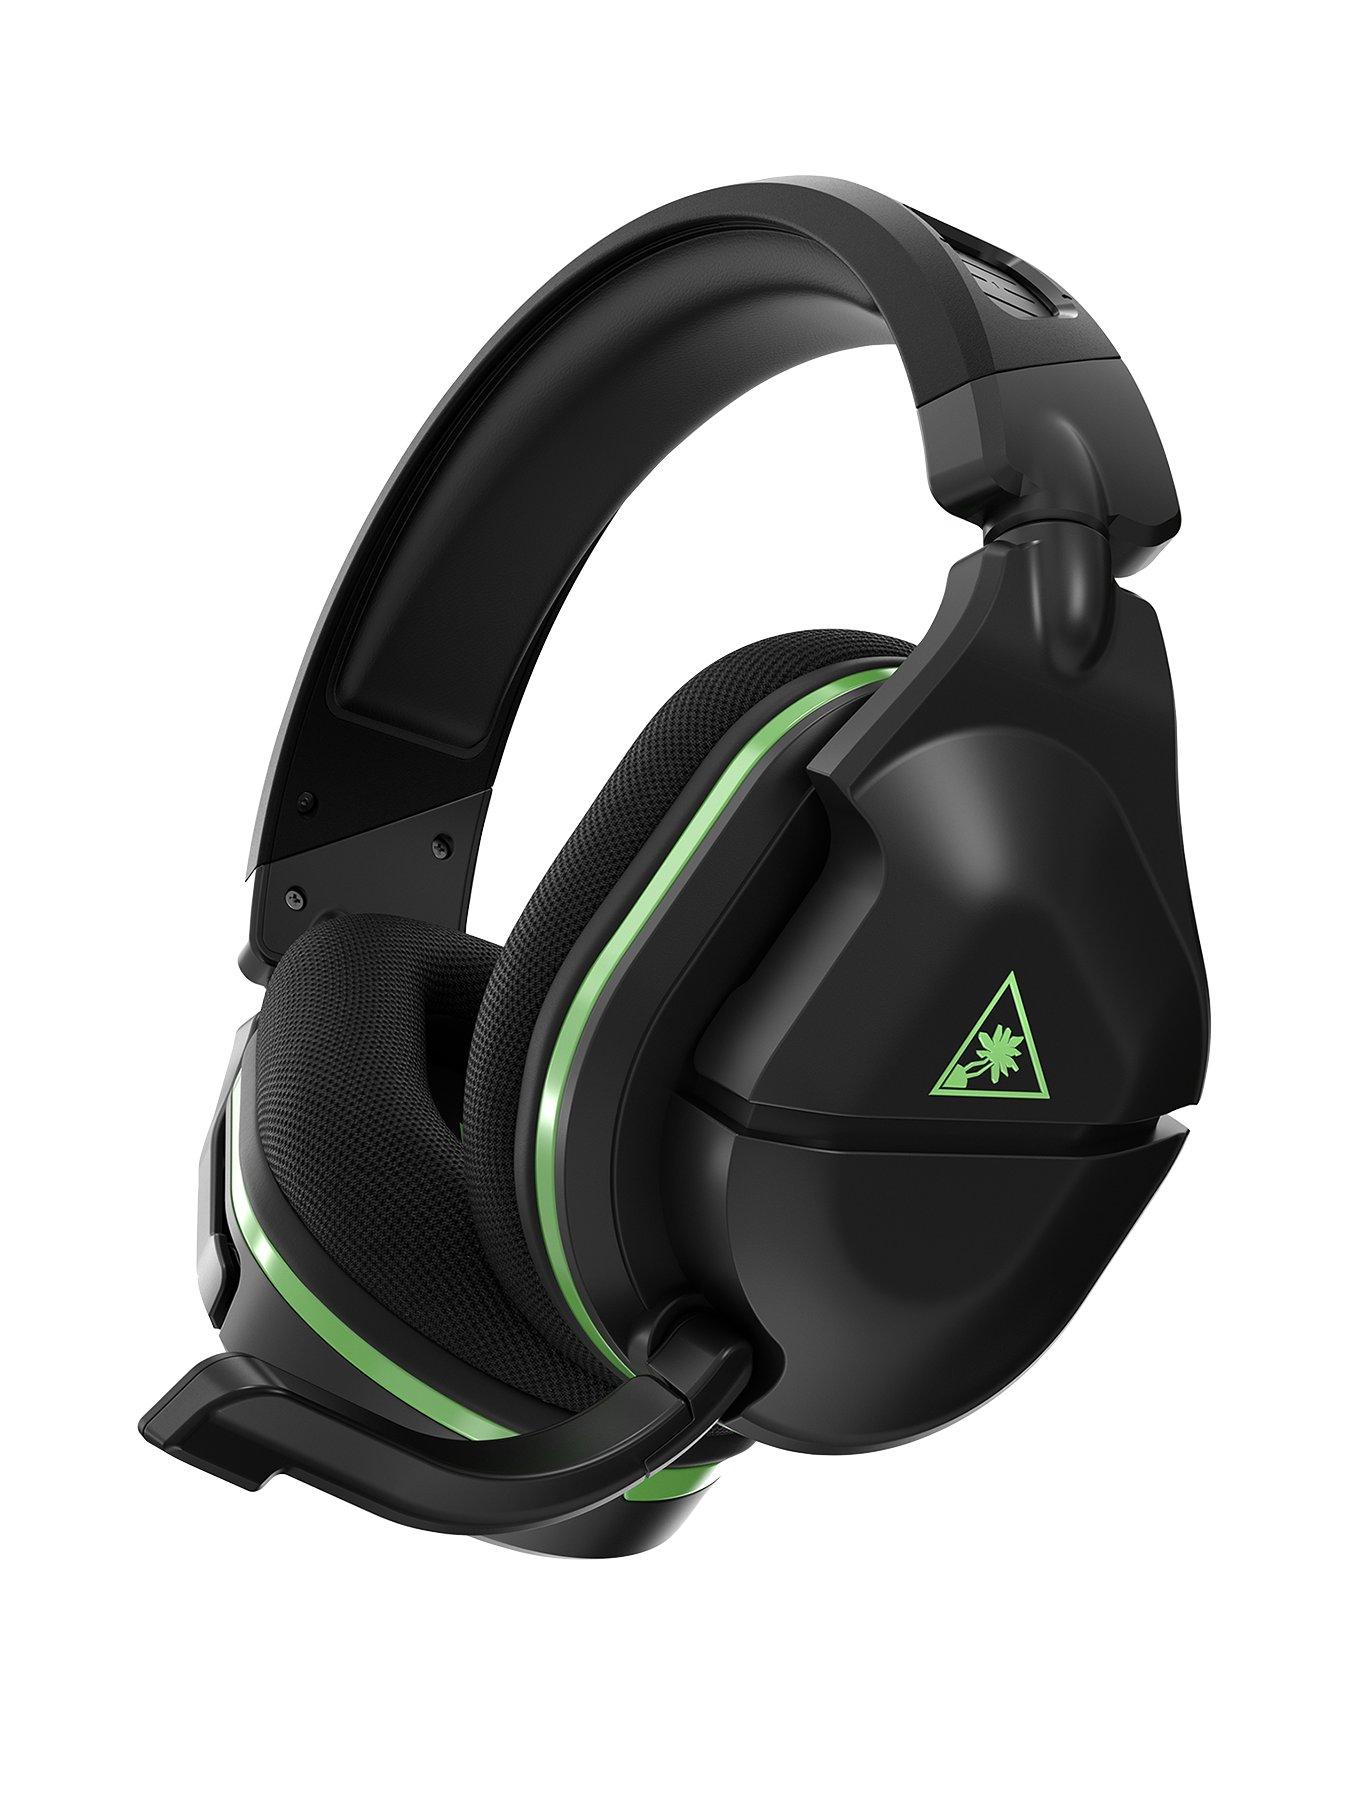 Get the PS5 Pulse 3D wireless gaming headset for just £67 from